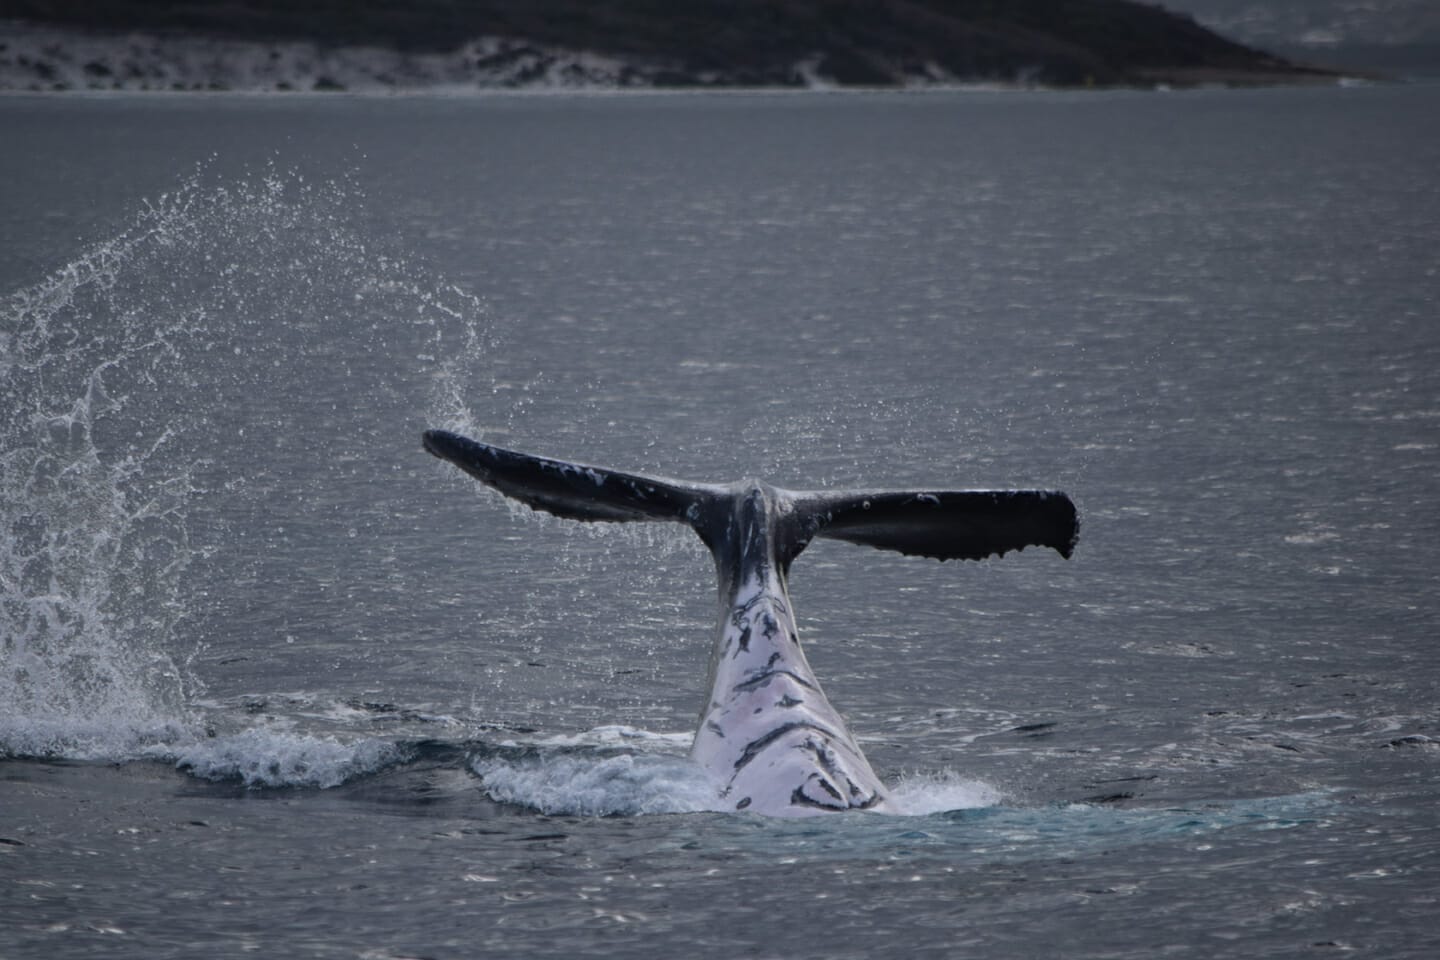 Humpback Whale in King George Sound, Albany. Photo Credit: Nathan